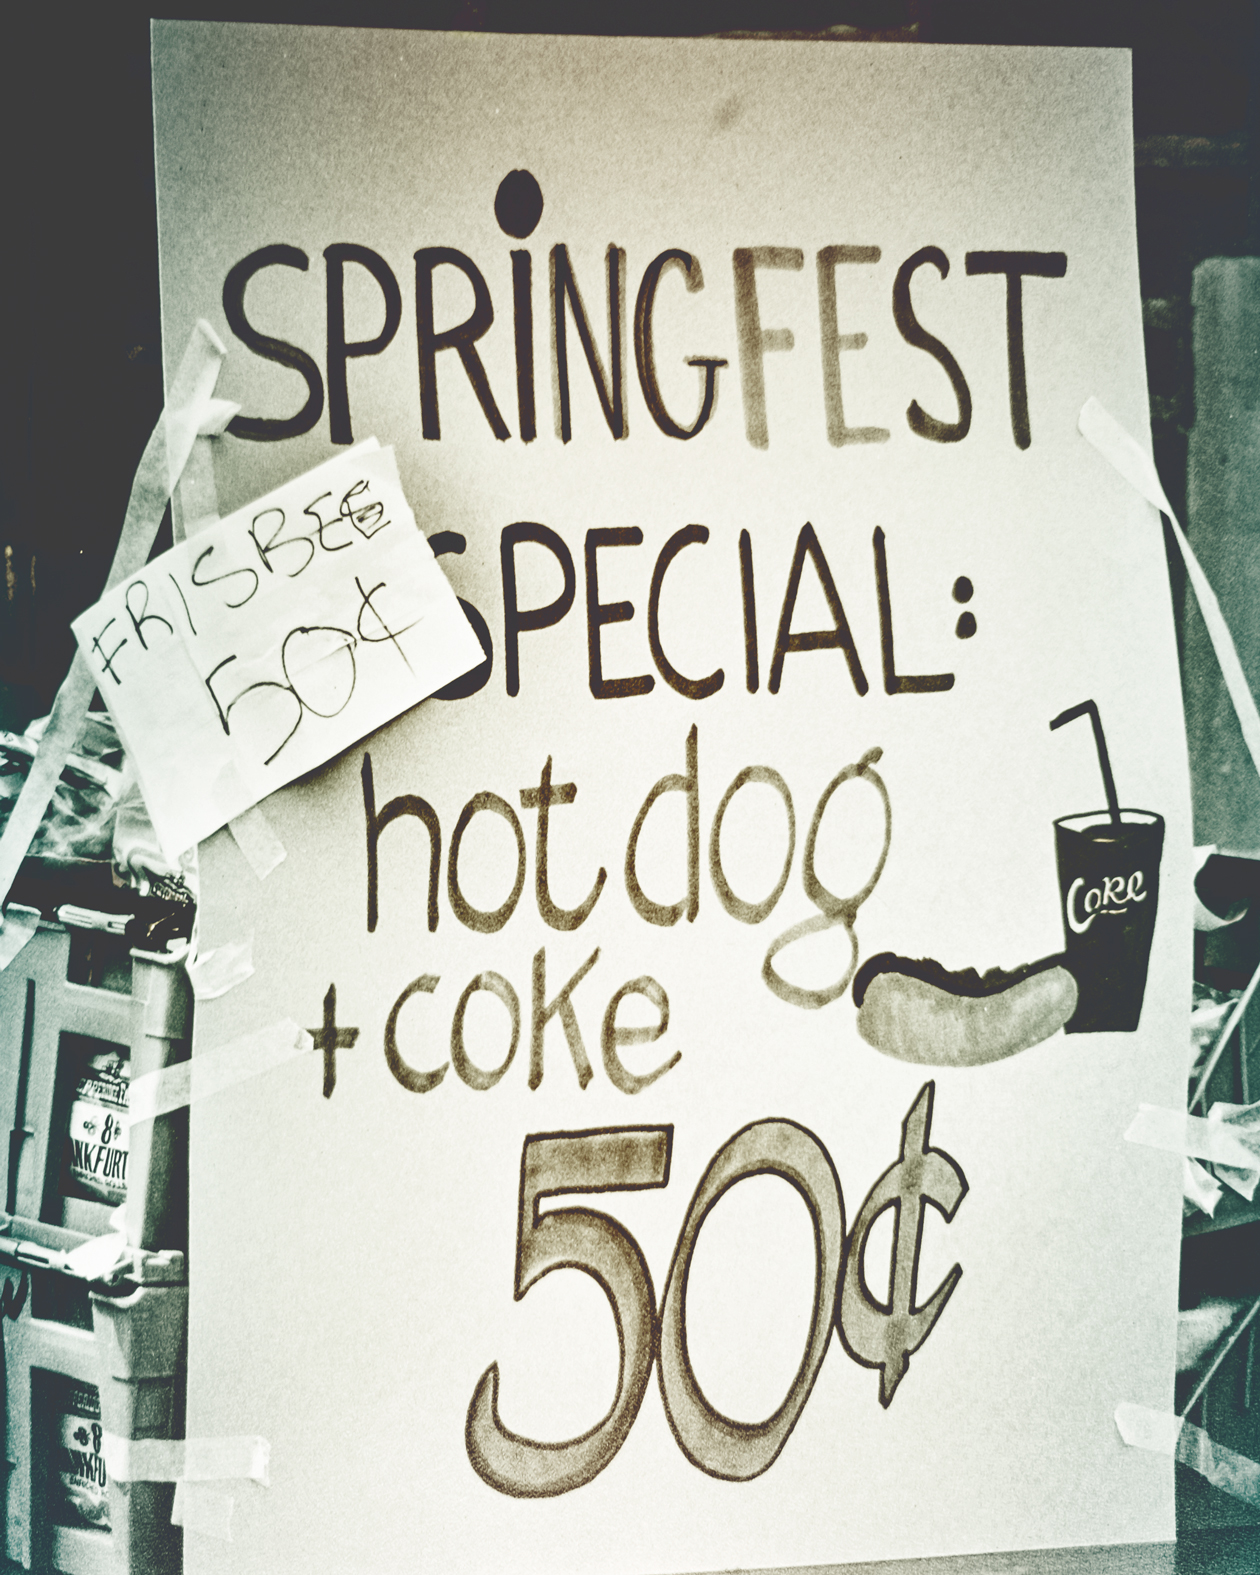 Hot dog and Coke special sign, SpringFest, late 1970s